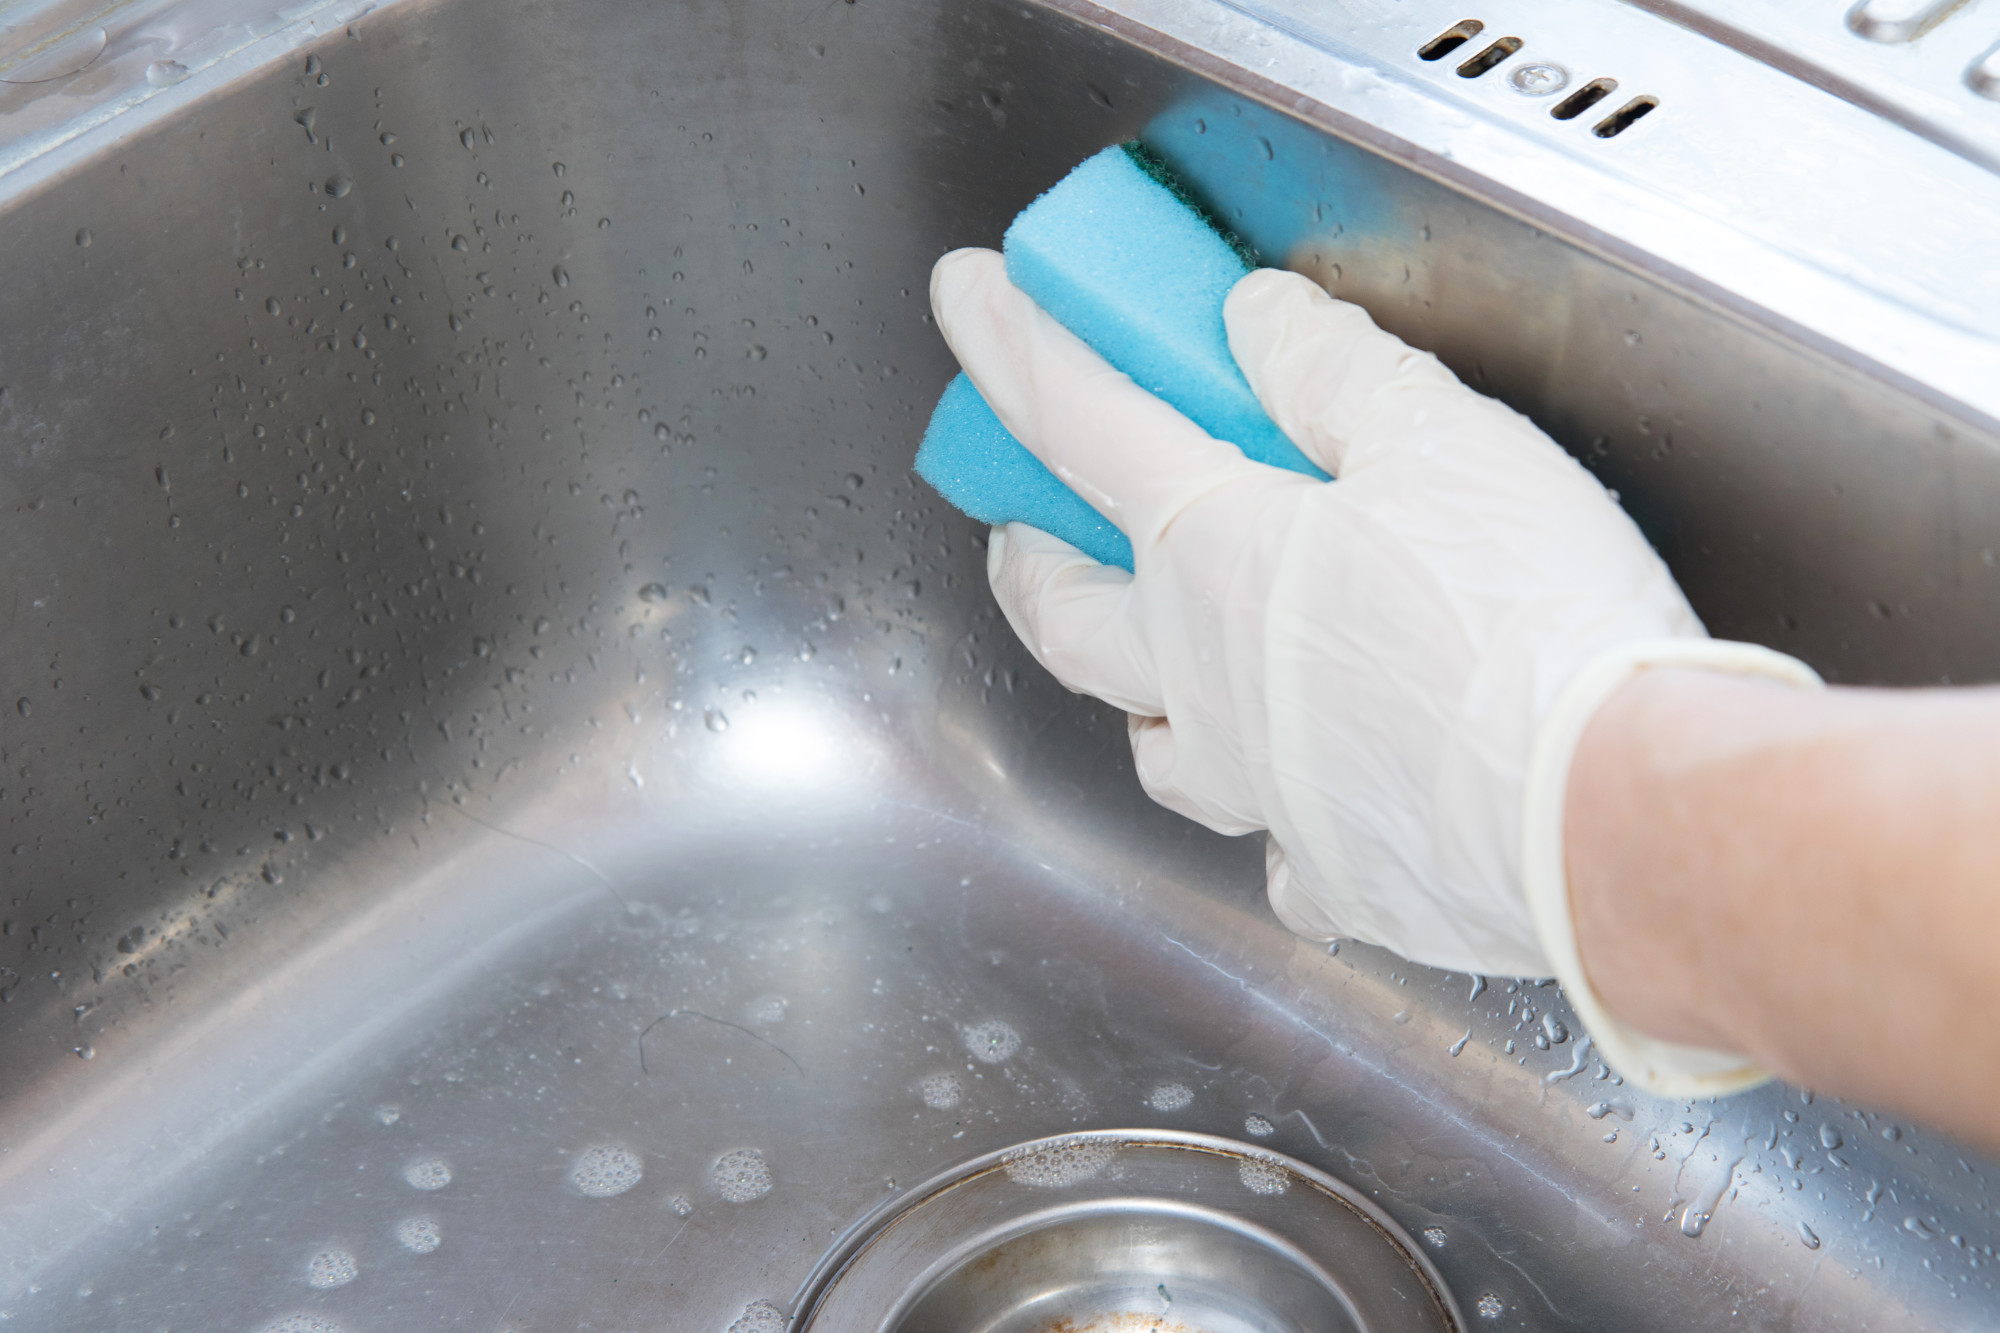 http://bookdirtbusters.com/wp-content/uploads/2020/03/how-to-clean-a-stained-sink.jpeg